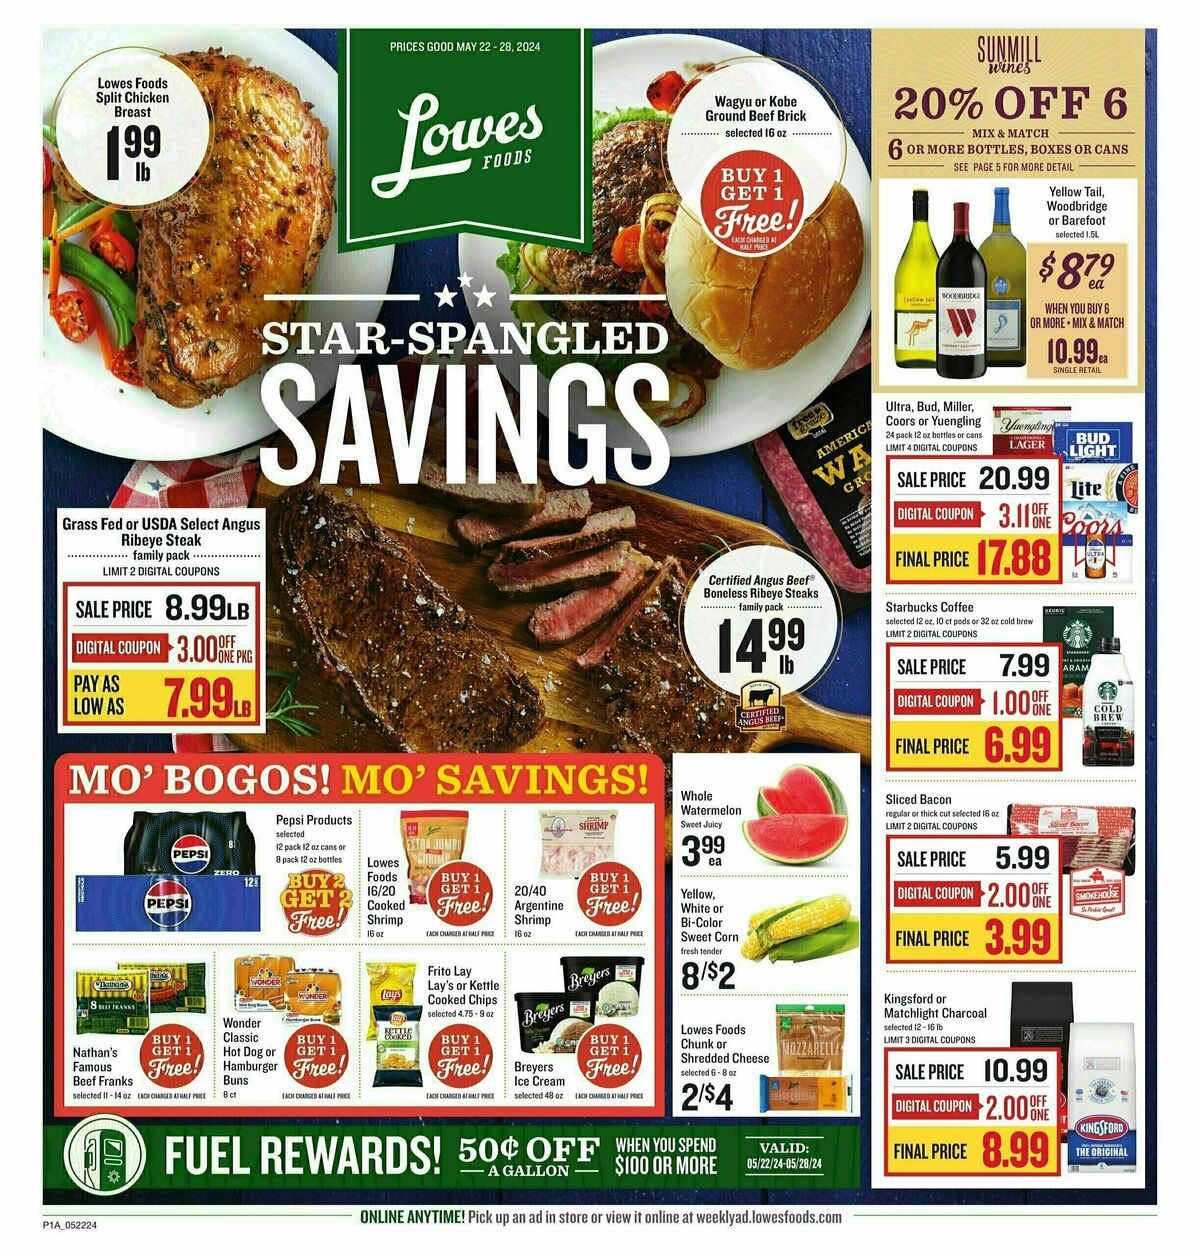 Lowes Foods Weekly Ad from May 22